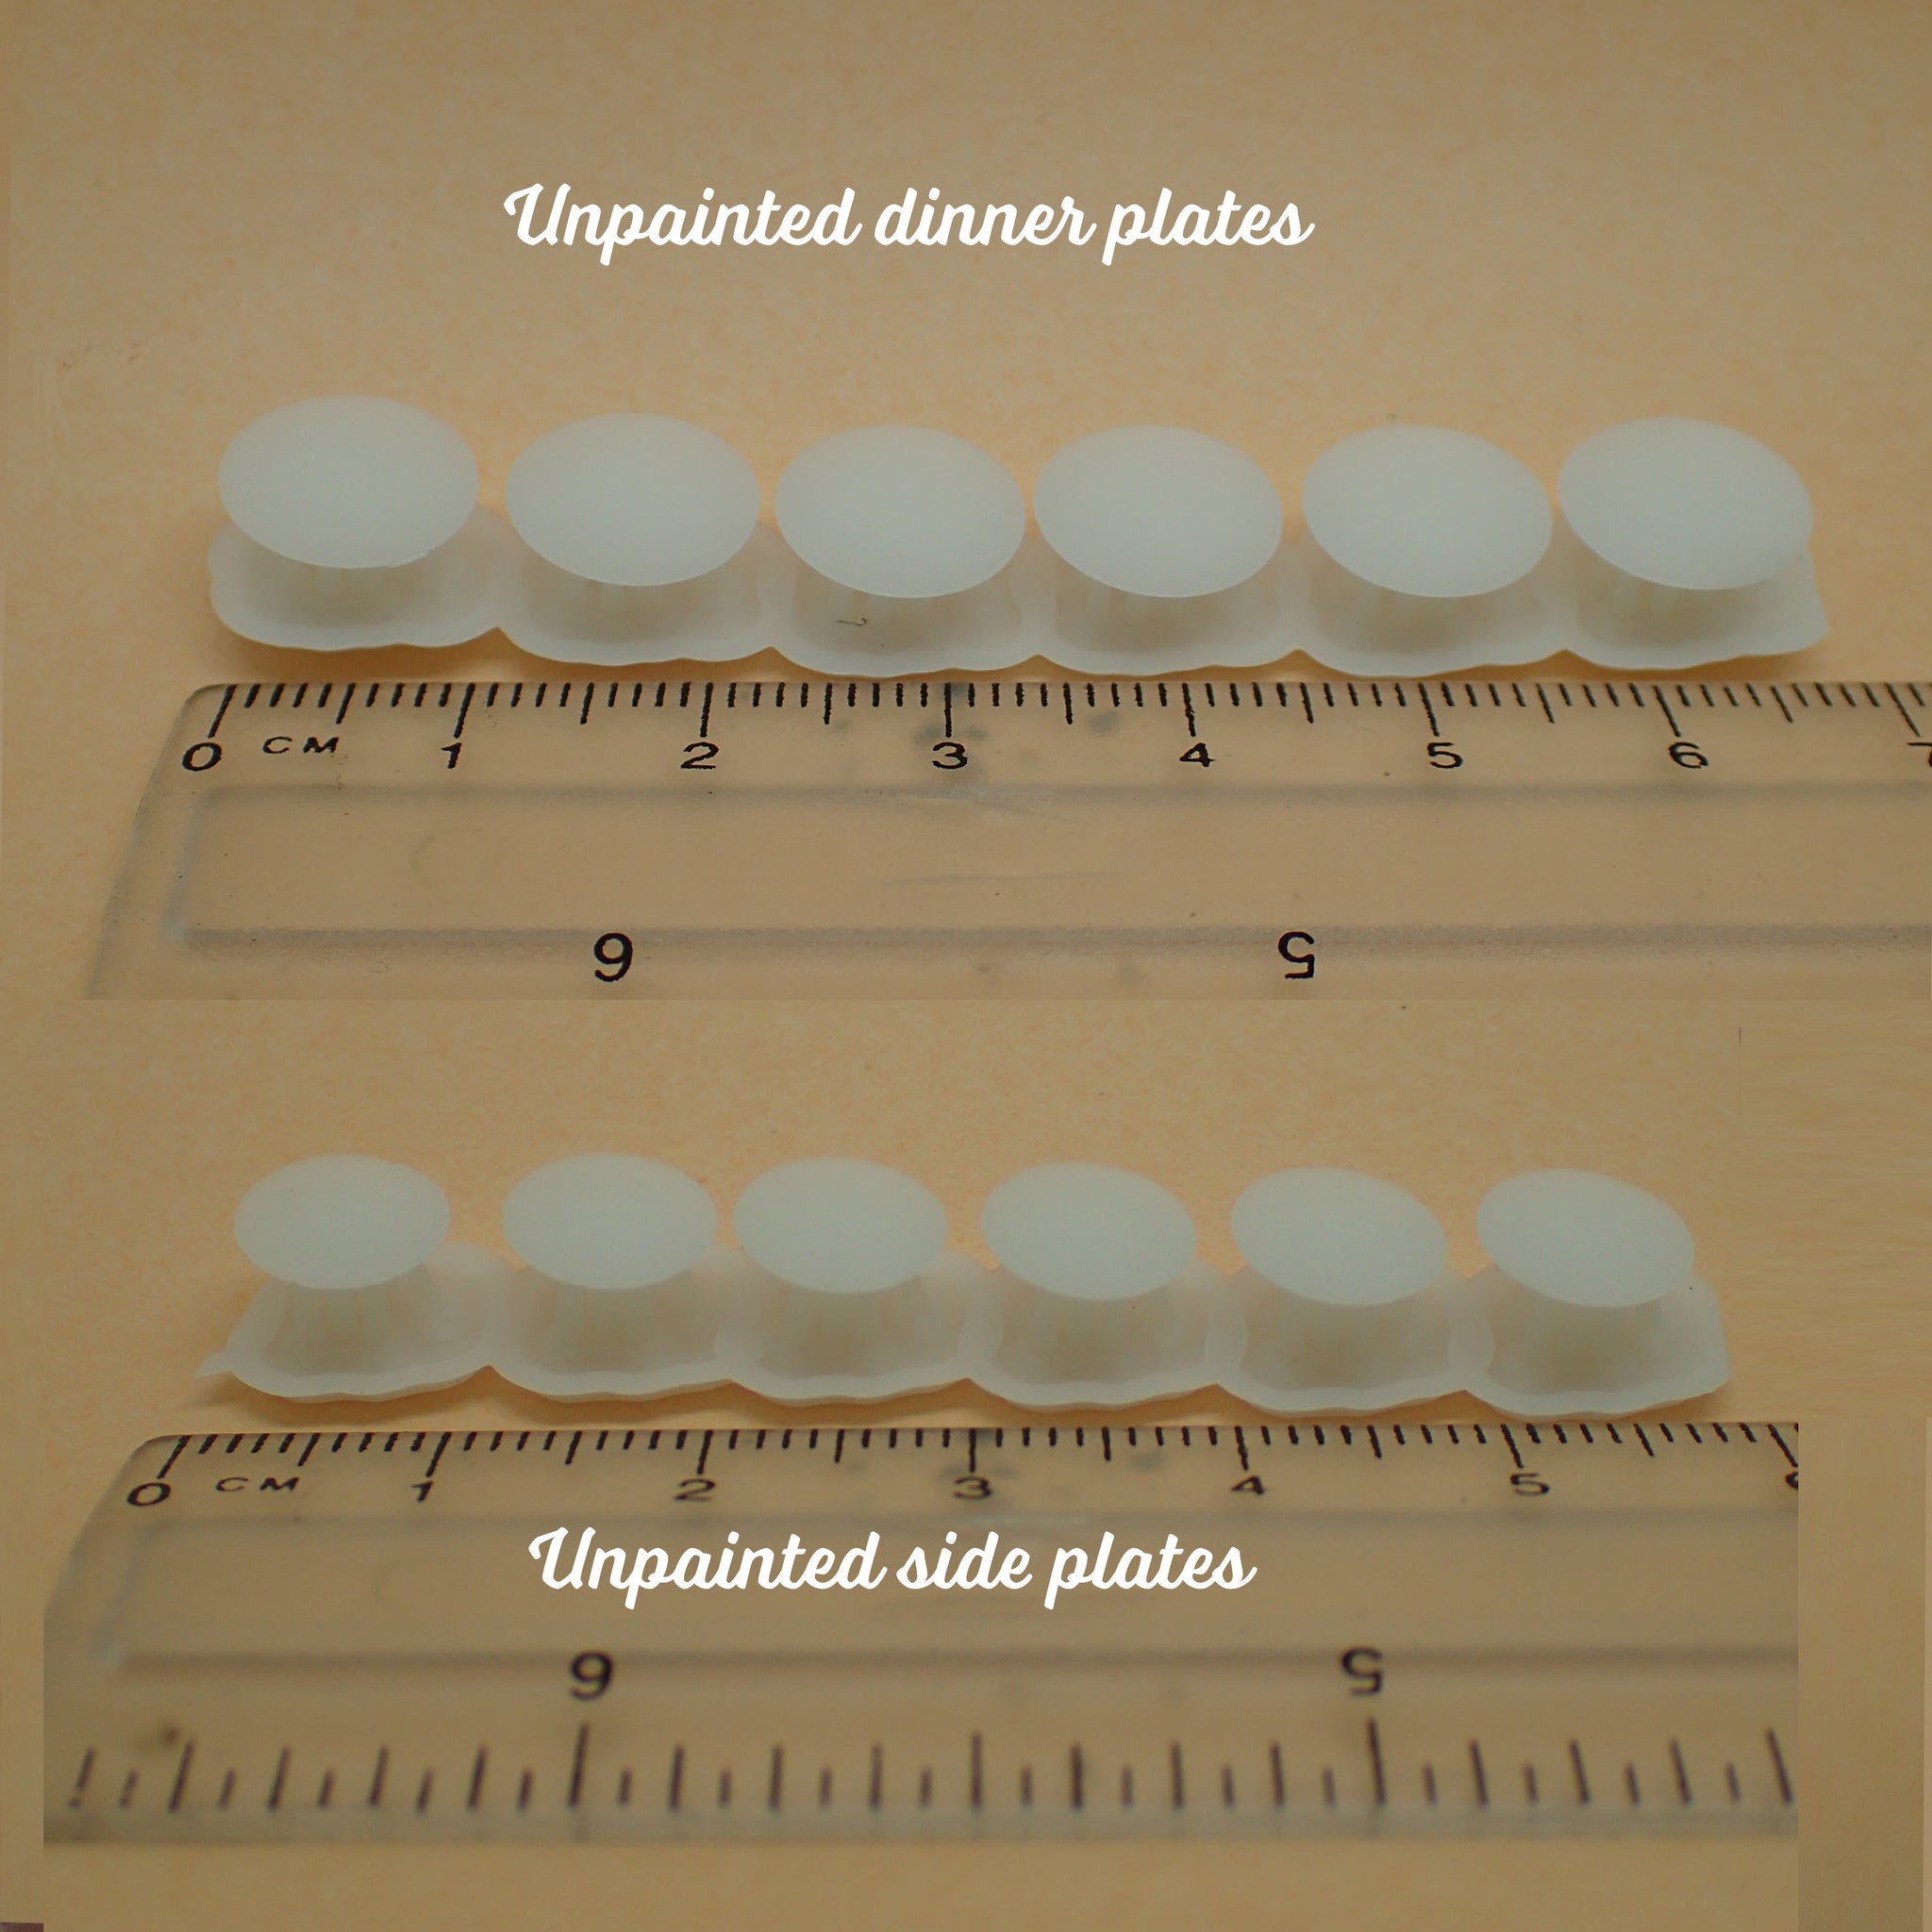 Set of 6 plates, 1/24th scale